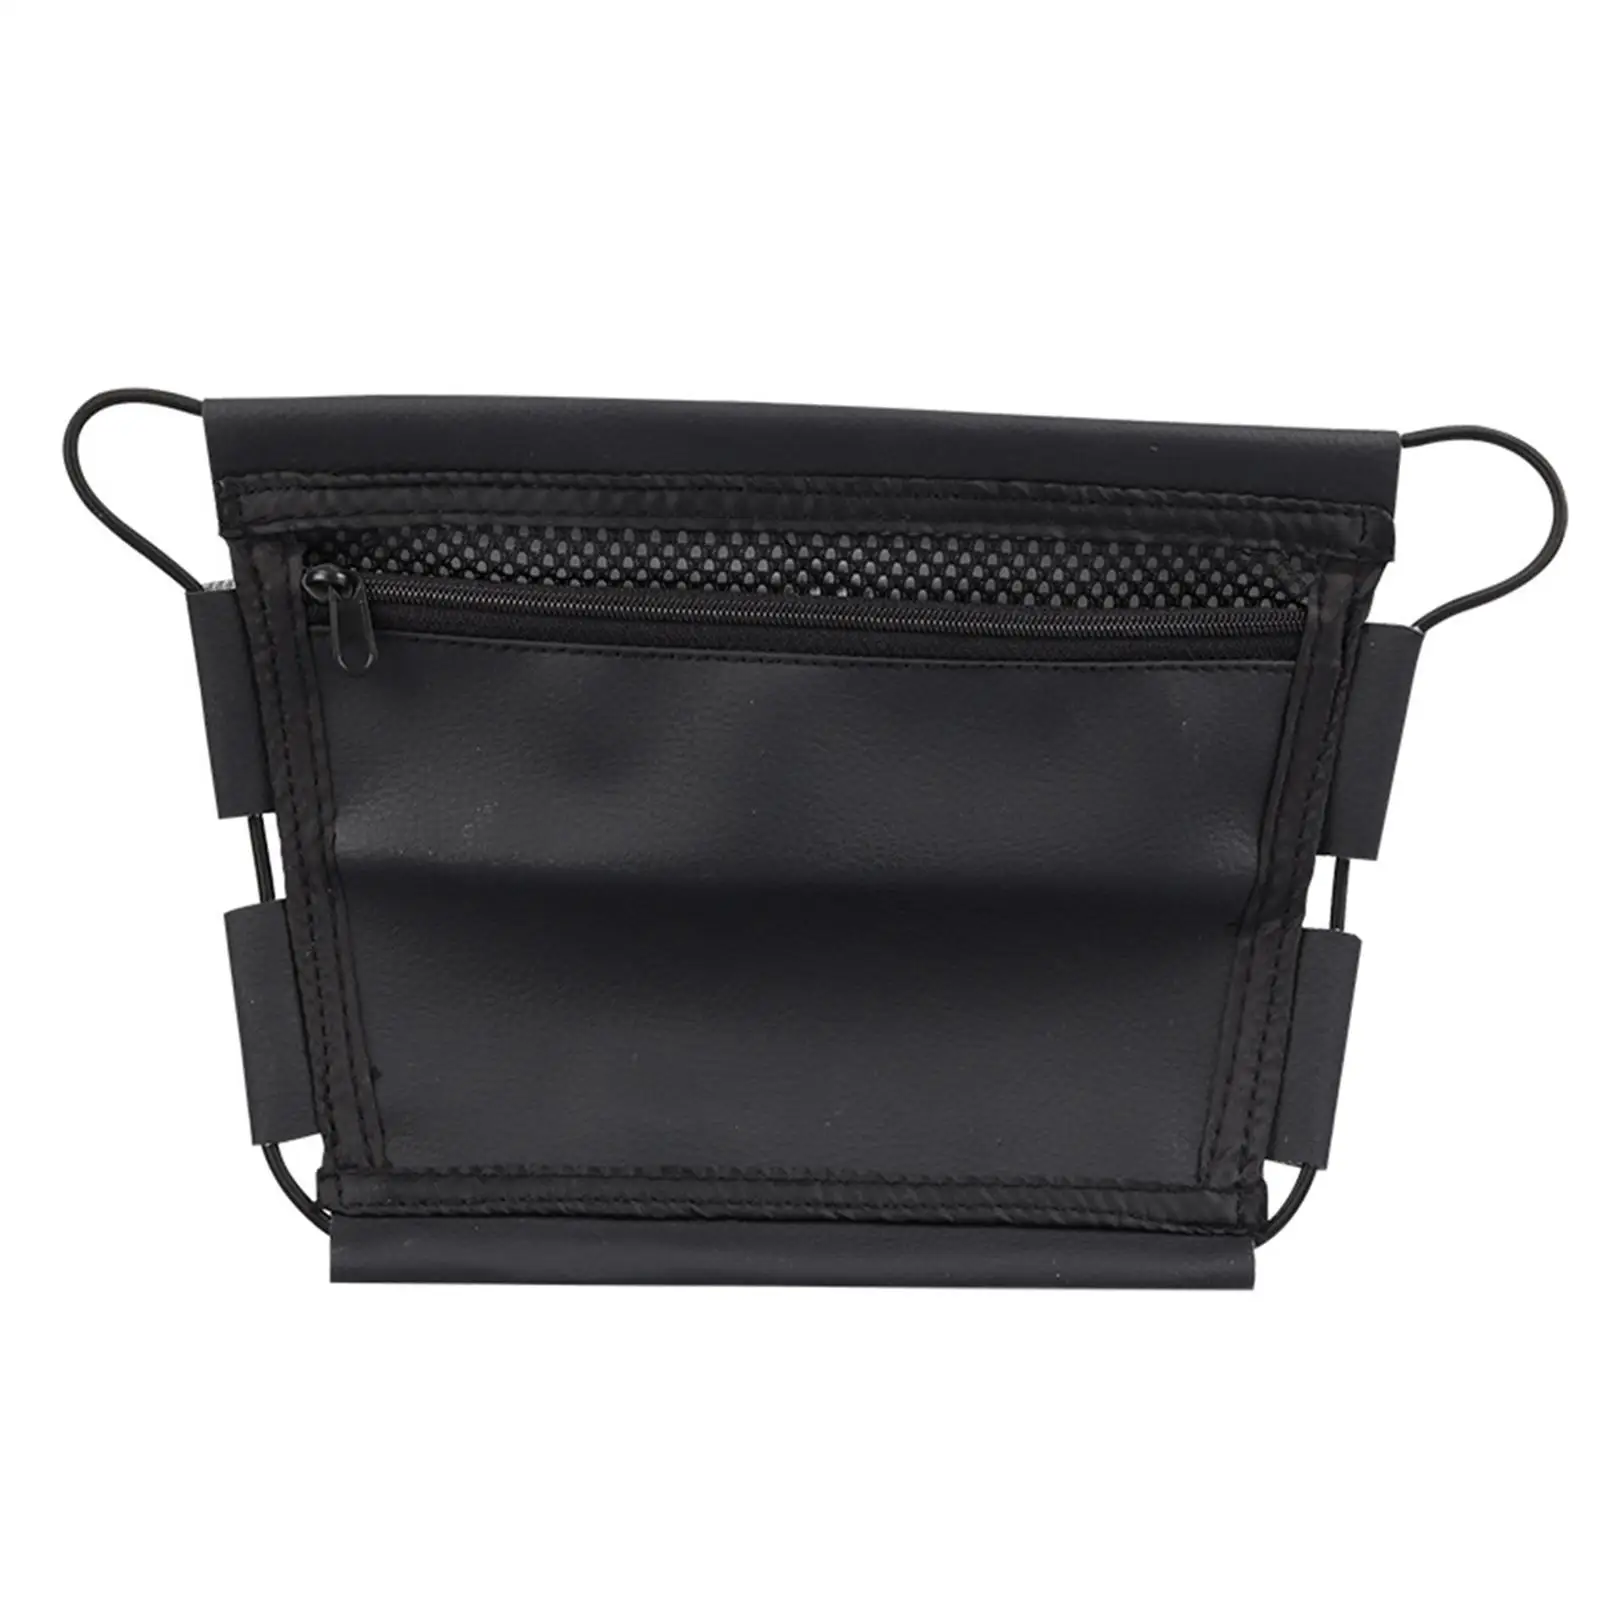 Under Seat Storage Bag Black Accessories Elastic Band Designed with Mounting